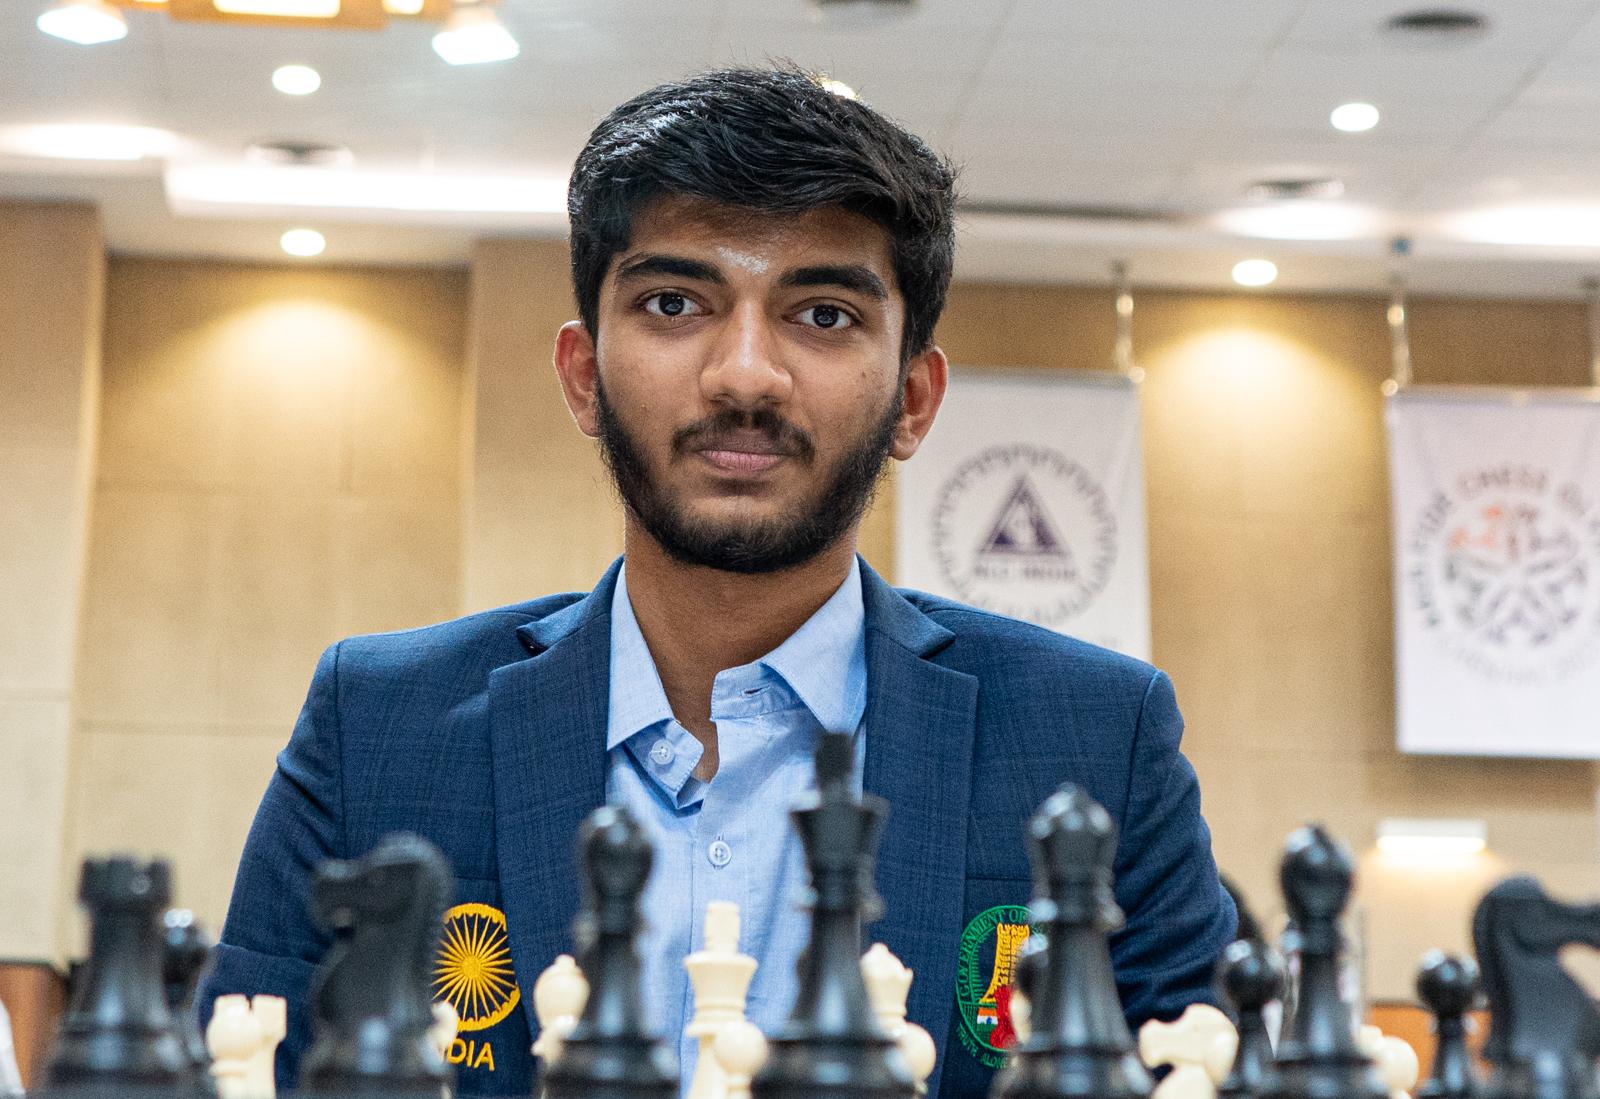 Breaking news! The Chess Capital of India - Chennai will host the